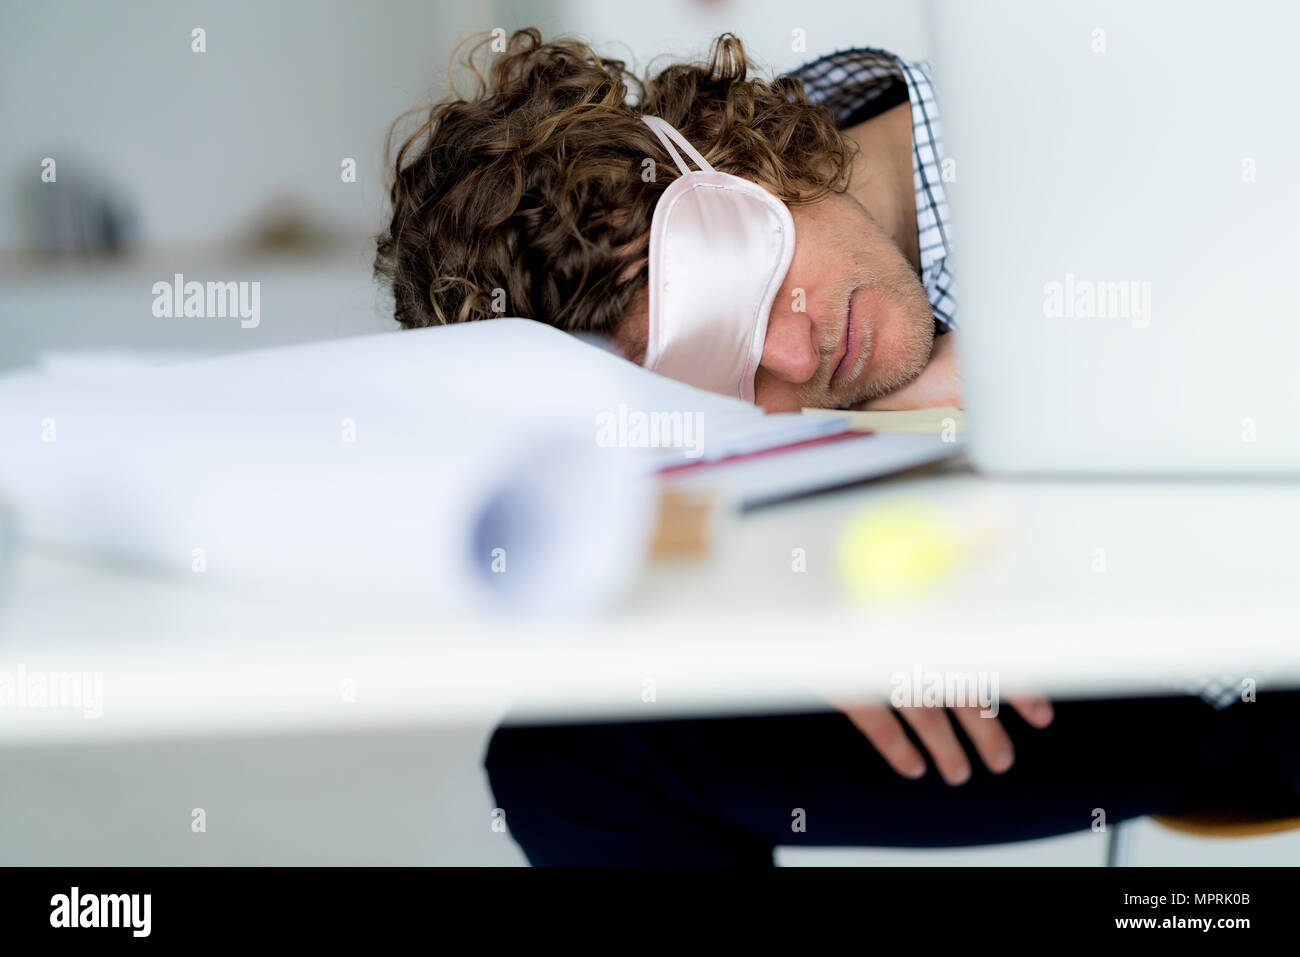 Overworked businessman sleeping at his desk wearing a sleeping mask Stock Photo